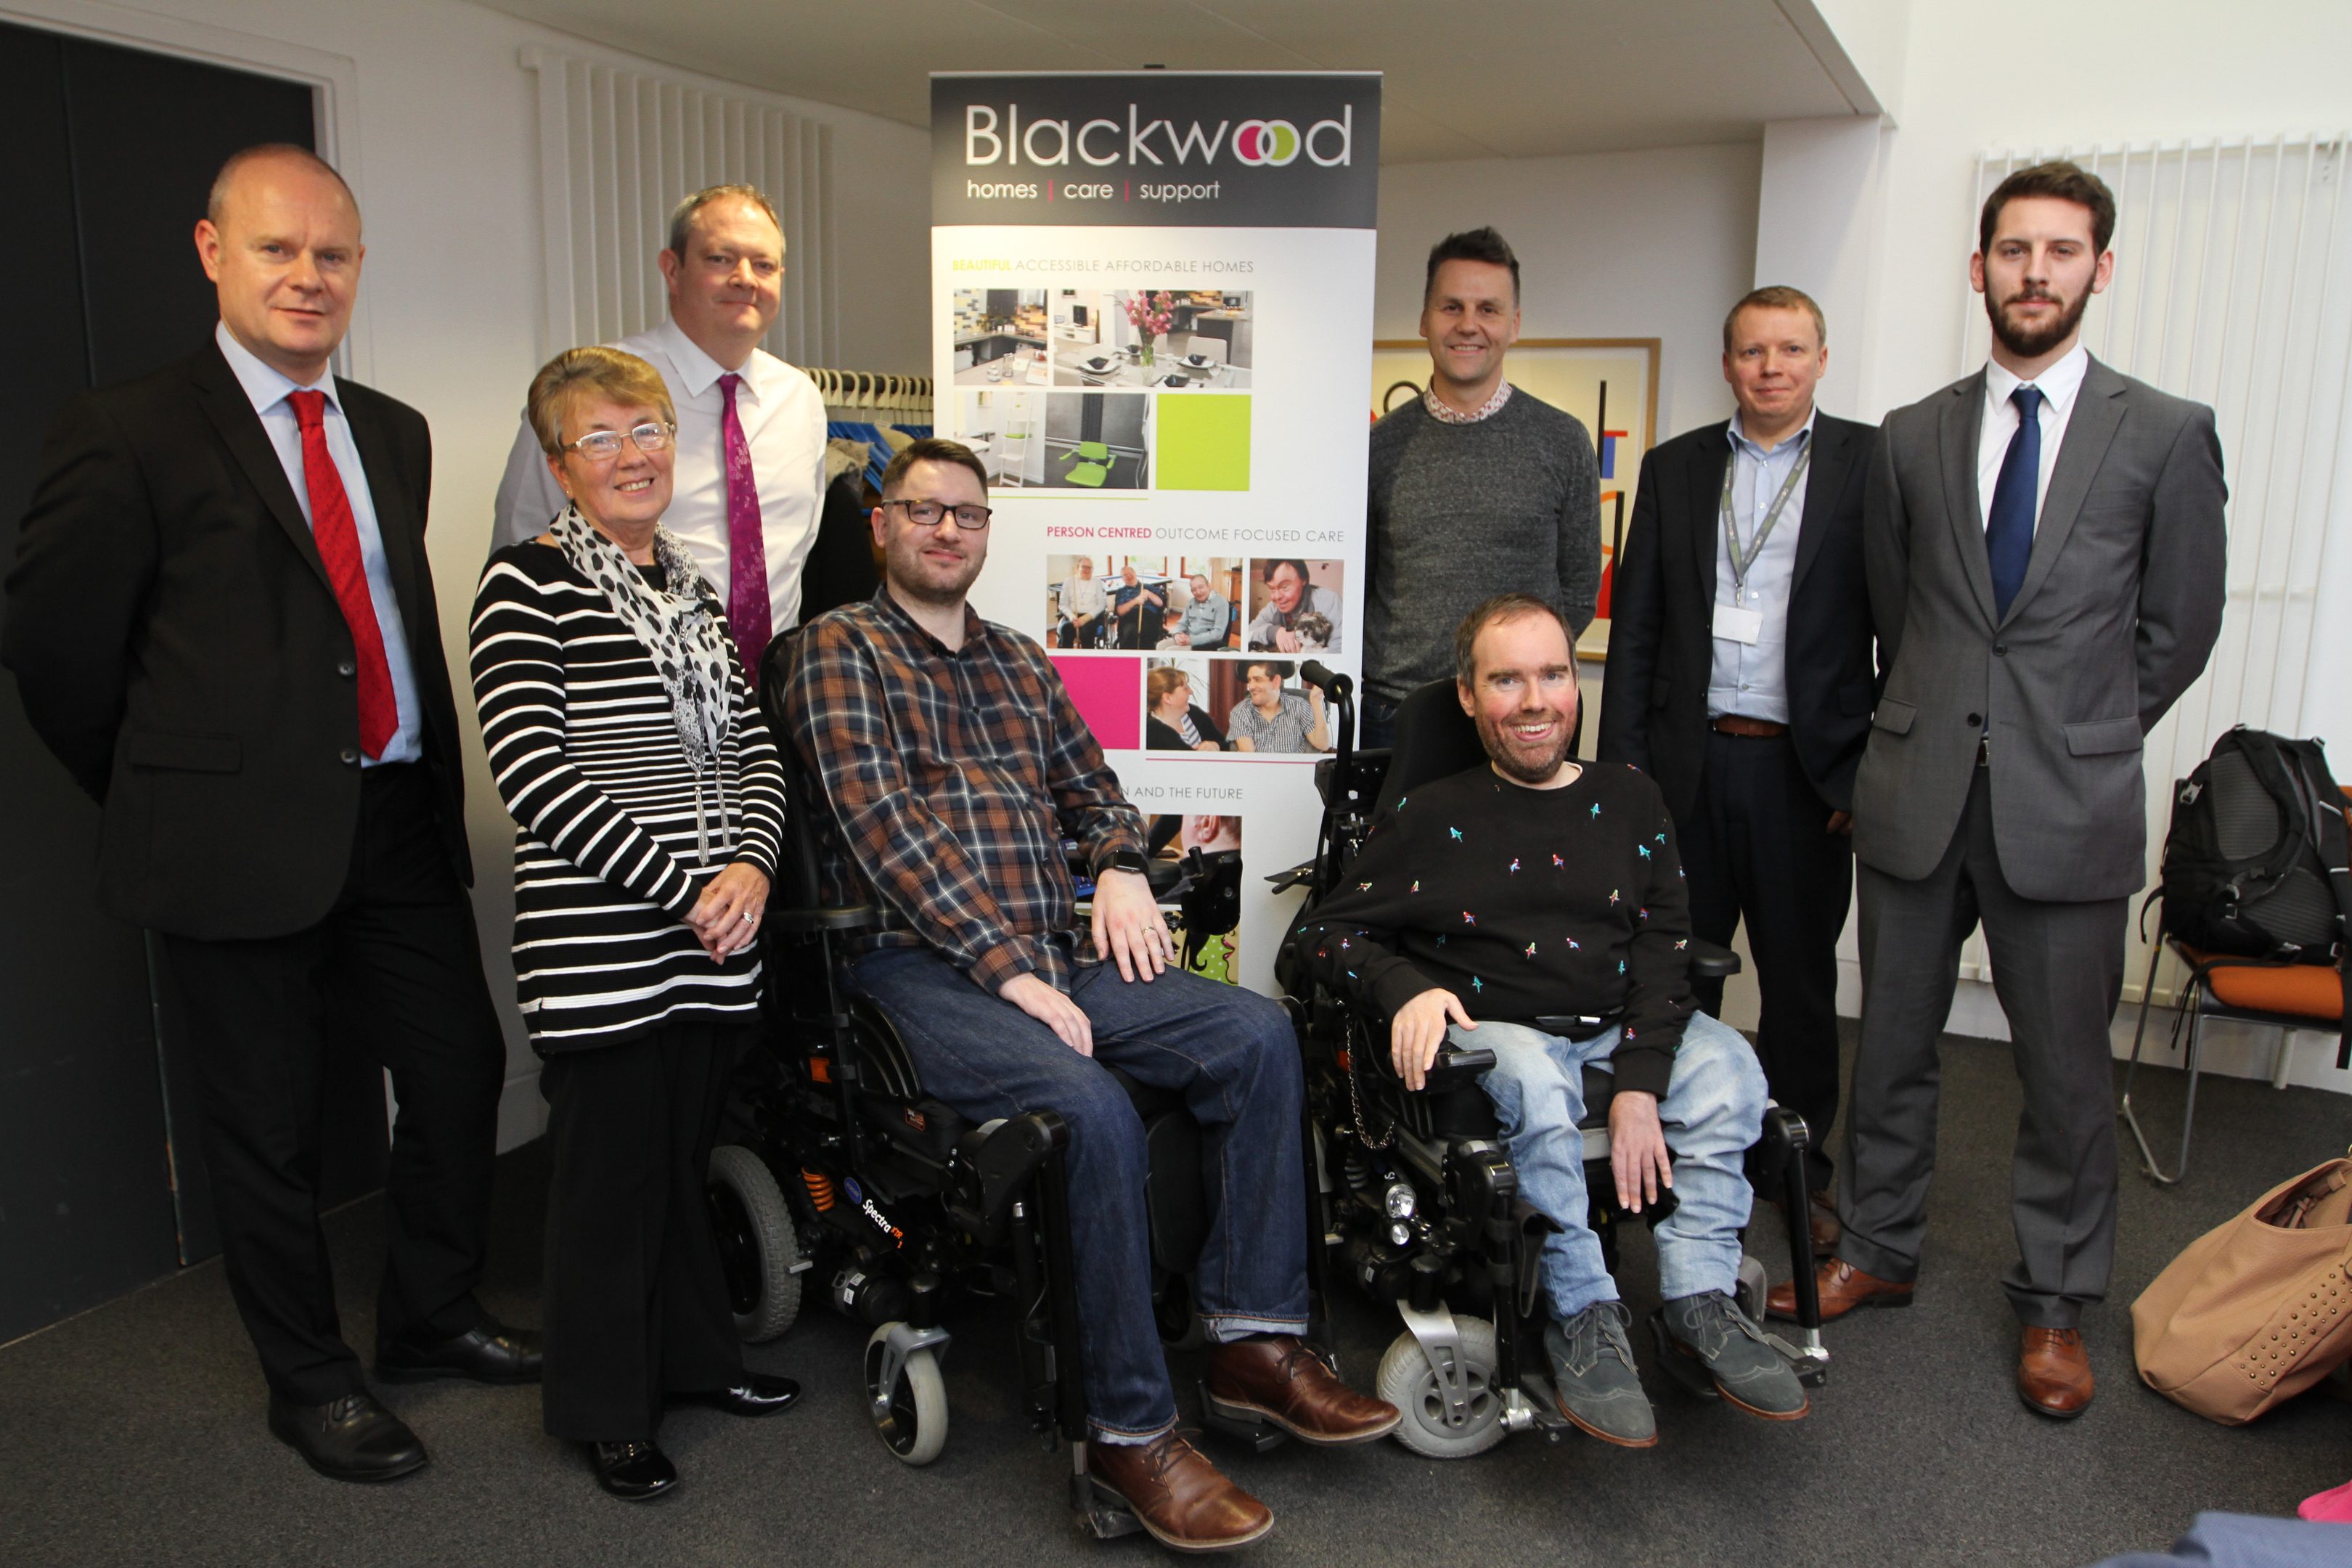 The judges from today's awards. Back row: Tom Thomas, Richard Neville and Will Mitchell. Front row: Anne Walker, Gordon Aikman and Toby Mildon, with Colin Foskett and Paul Richoux from Blackwood.